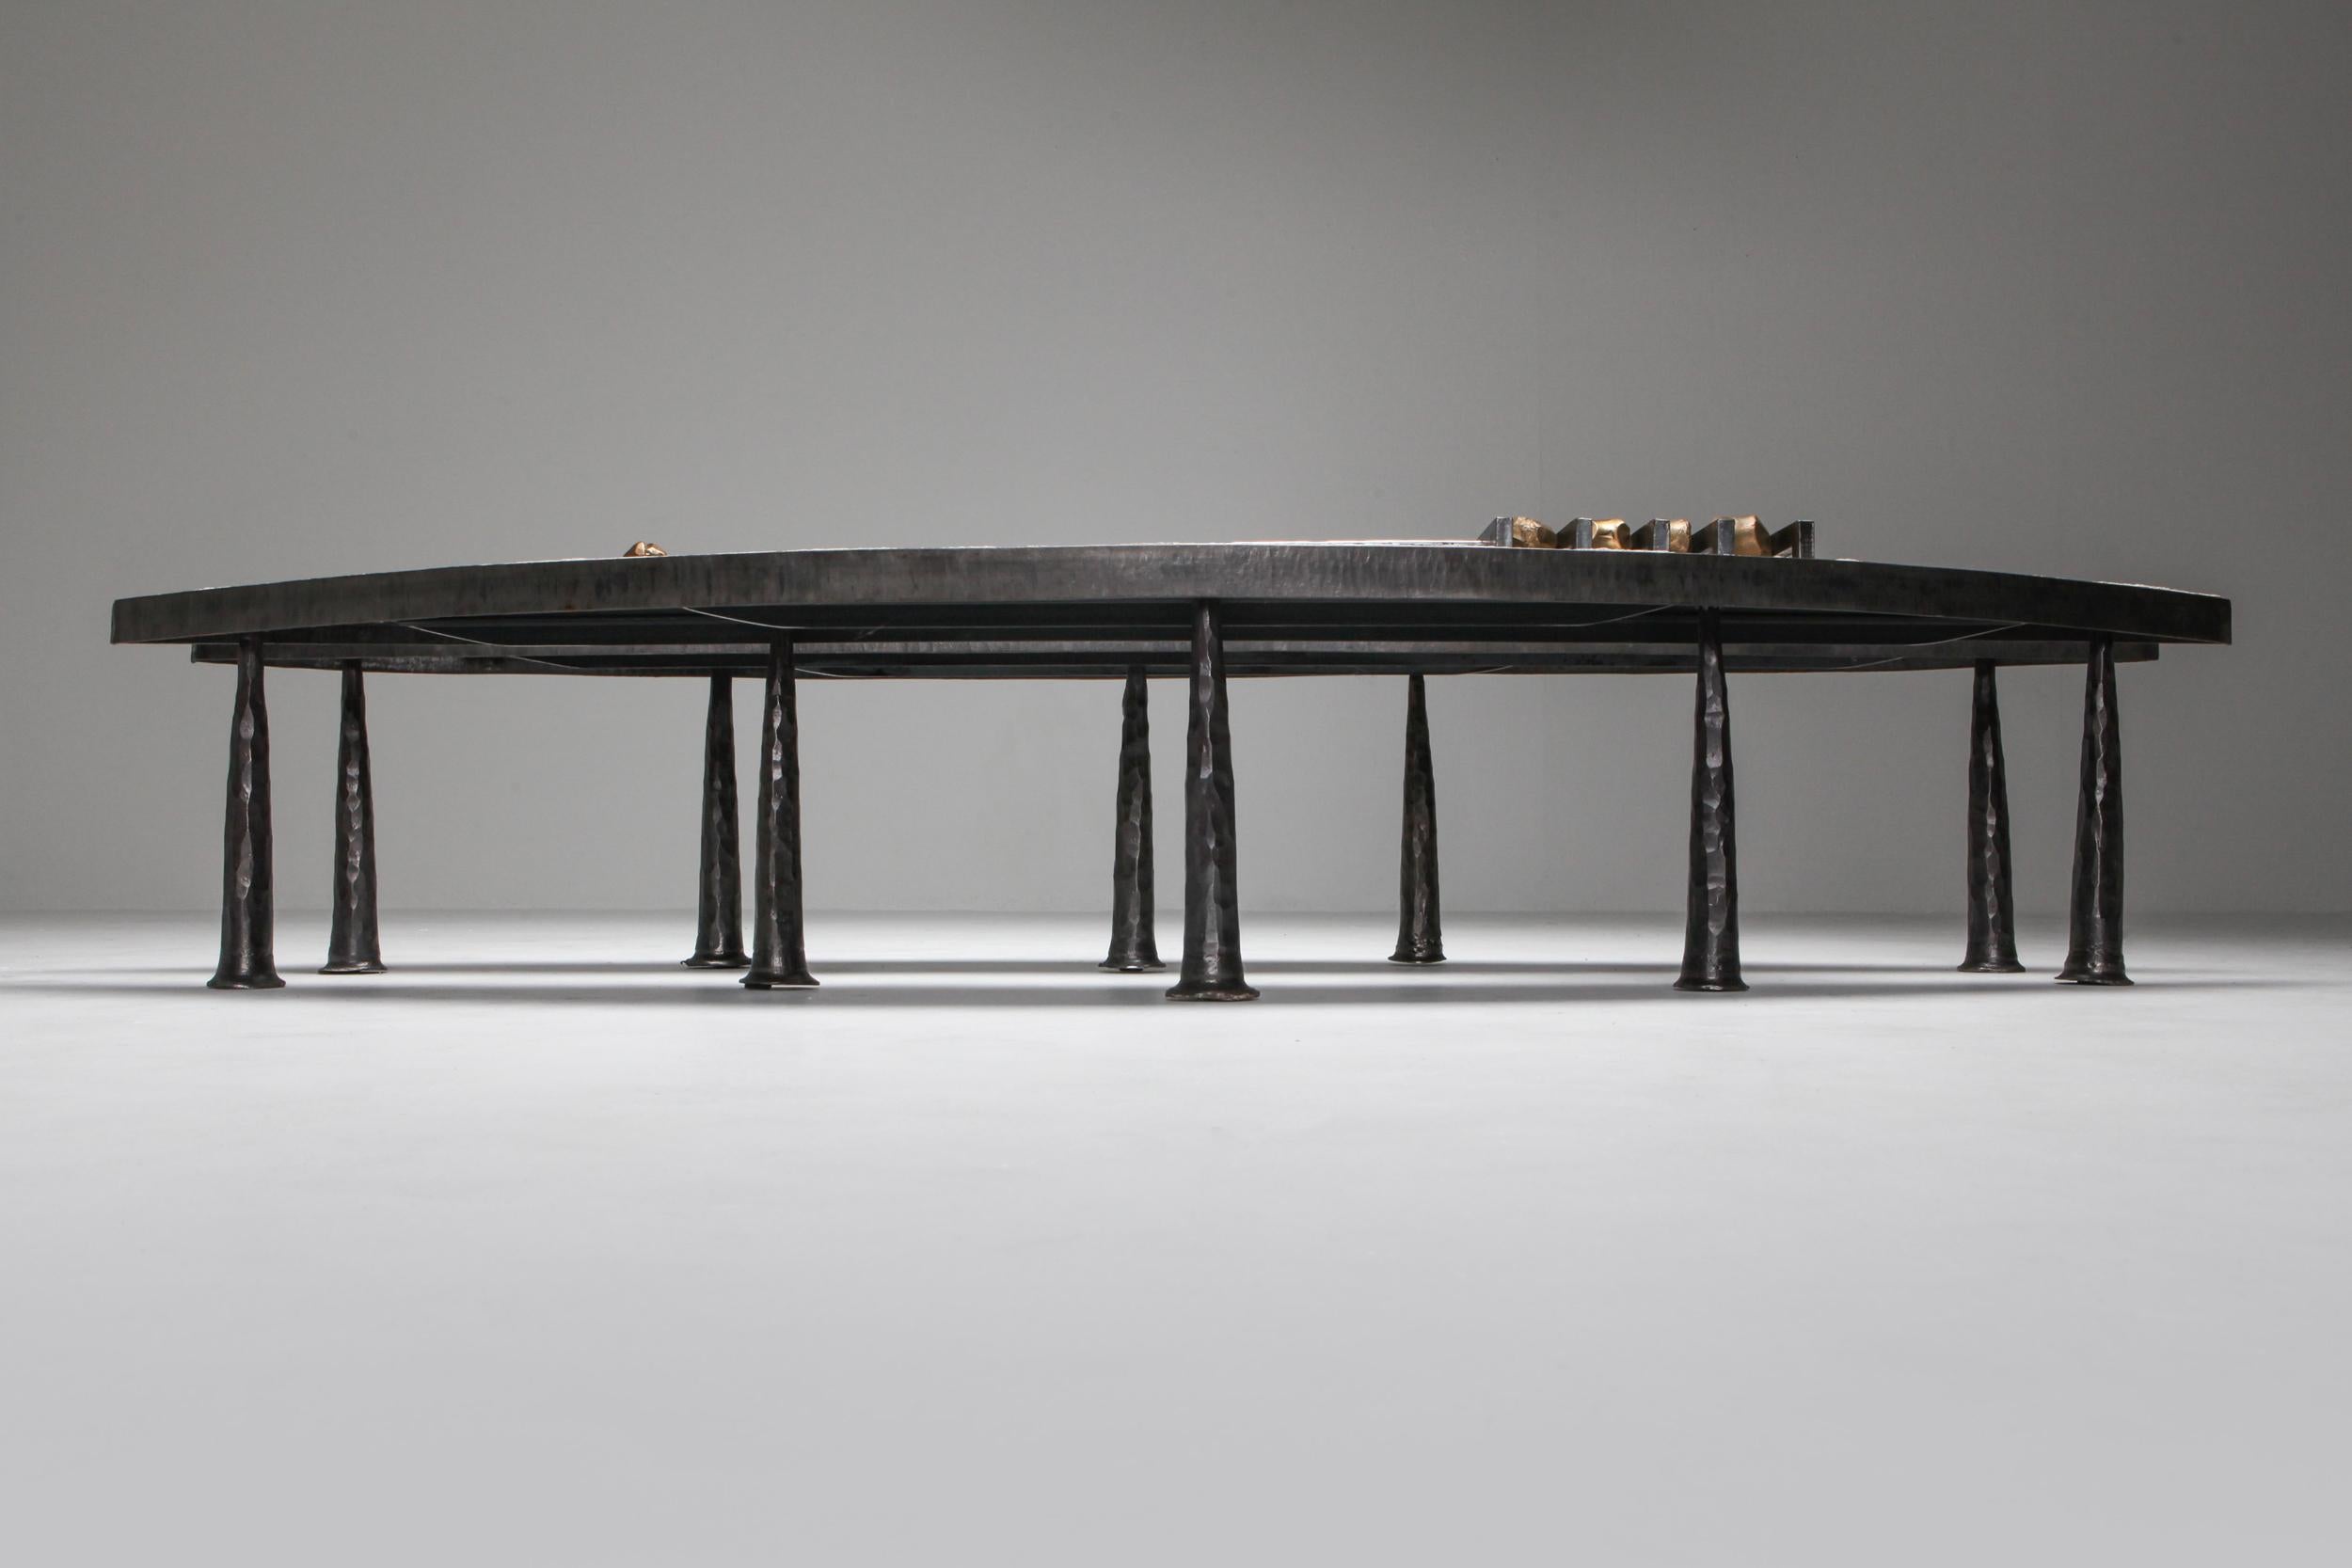 Brutalism; collectible design; Thomas Serruys; coffee table; 2019.

This one-of-a-kind coffee table is made out of steel and cement and has an industrial and brutalist approach.

Thomas Serruys, 1986, is a Belgian designer born in Bruges.